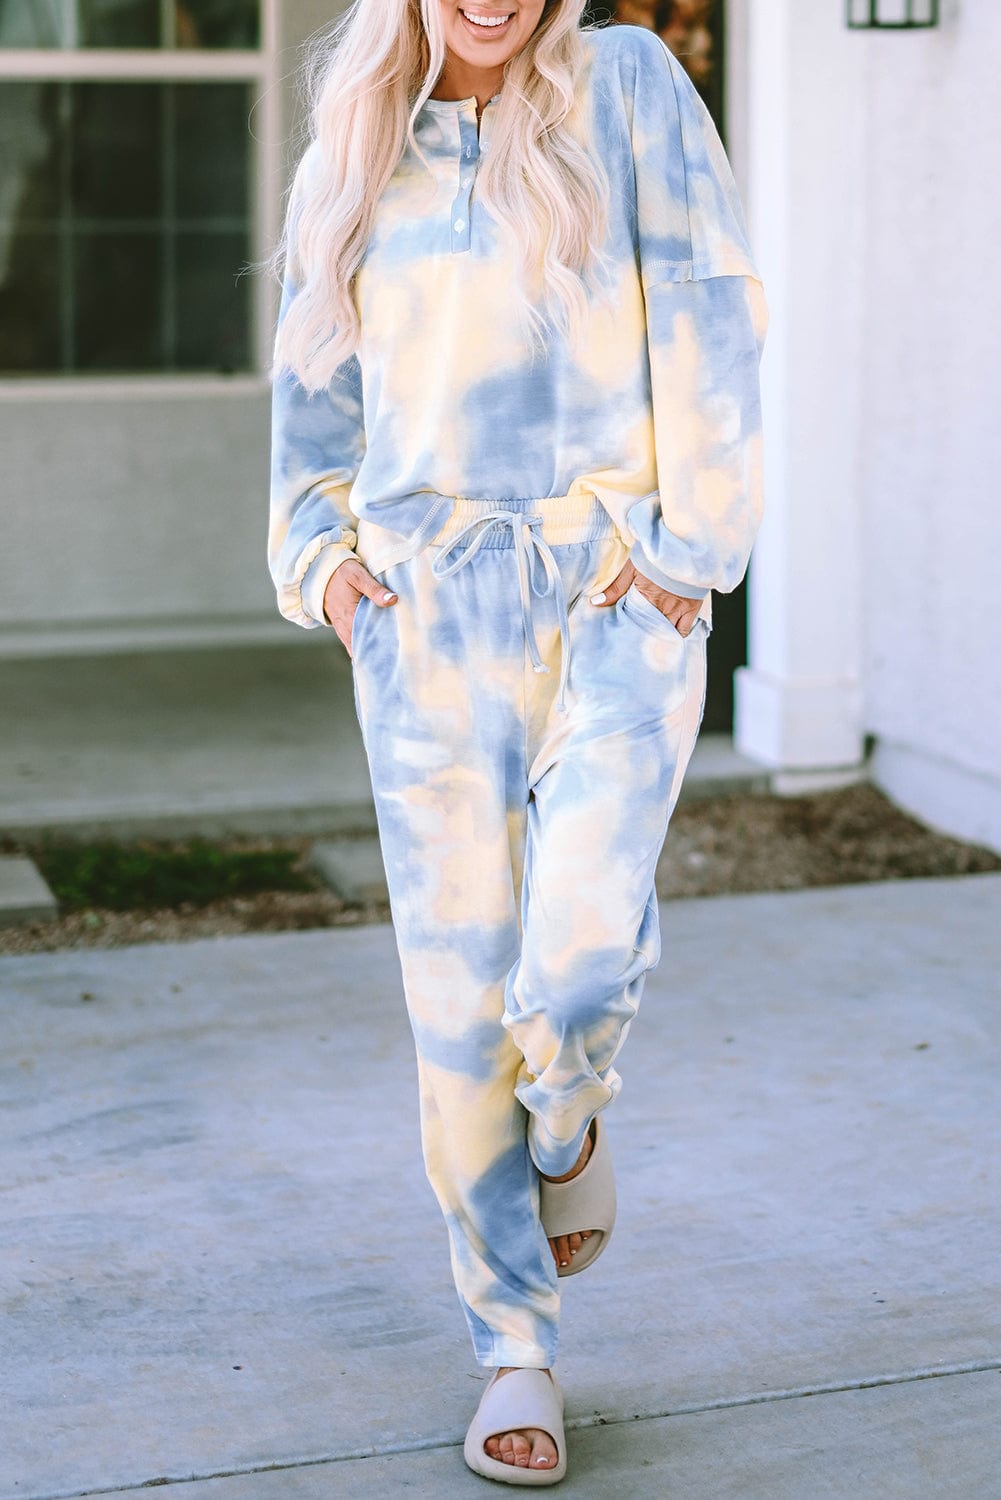 Shoppe EZR Loungewear Multicolor Tie Dye Henley Top and Drawstring Pants Outfit